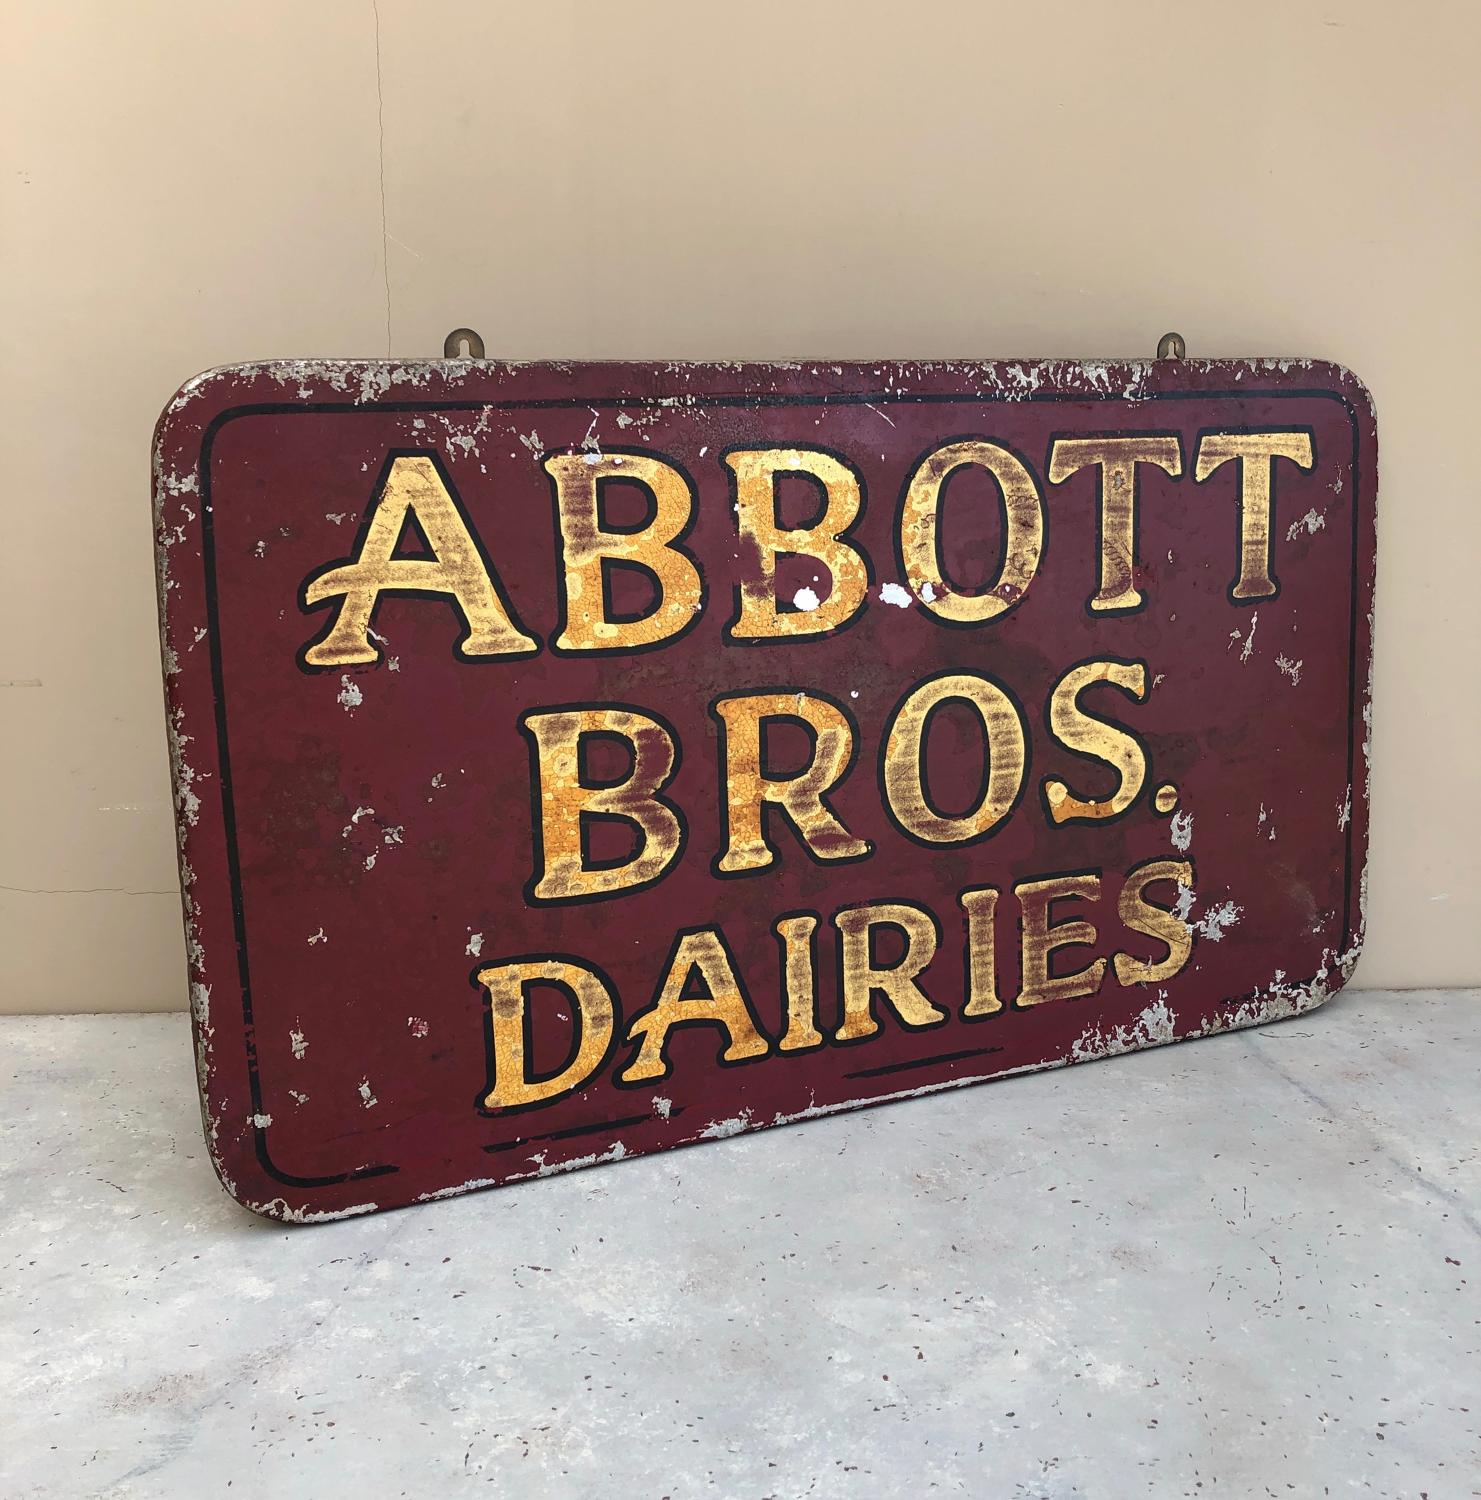 Early 20th Century Tin & Wood Dairy Sign - Abbott Bros Dairies